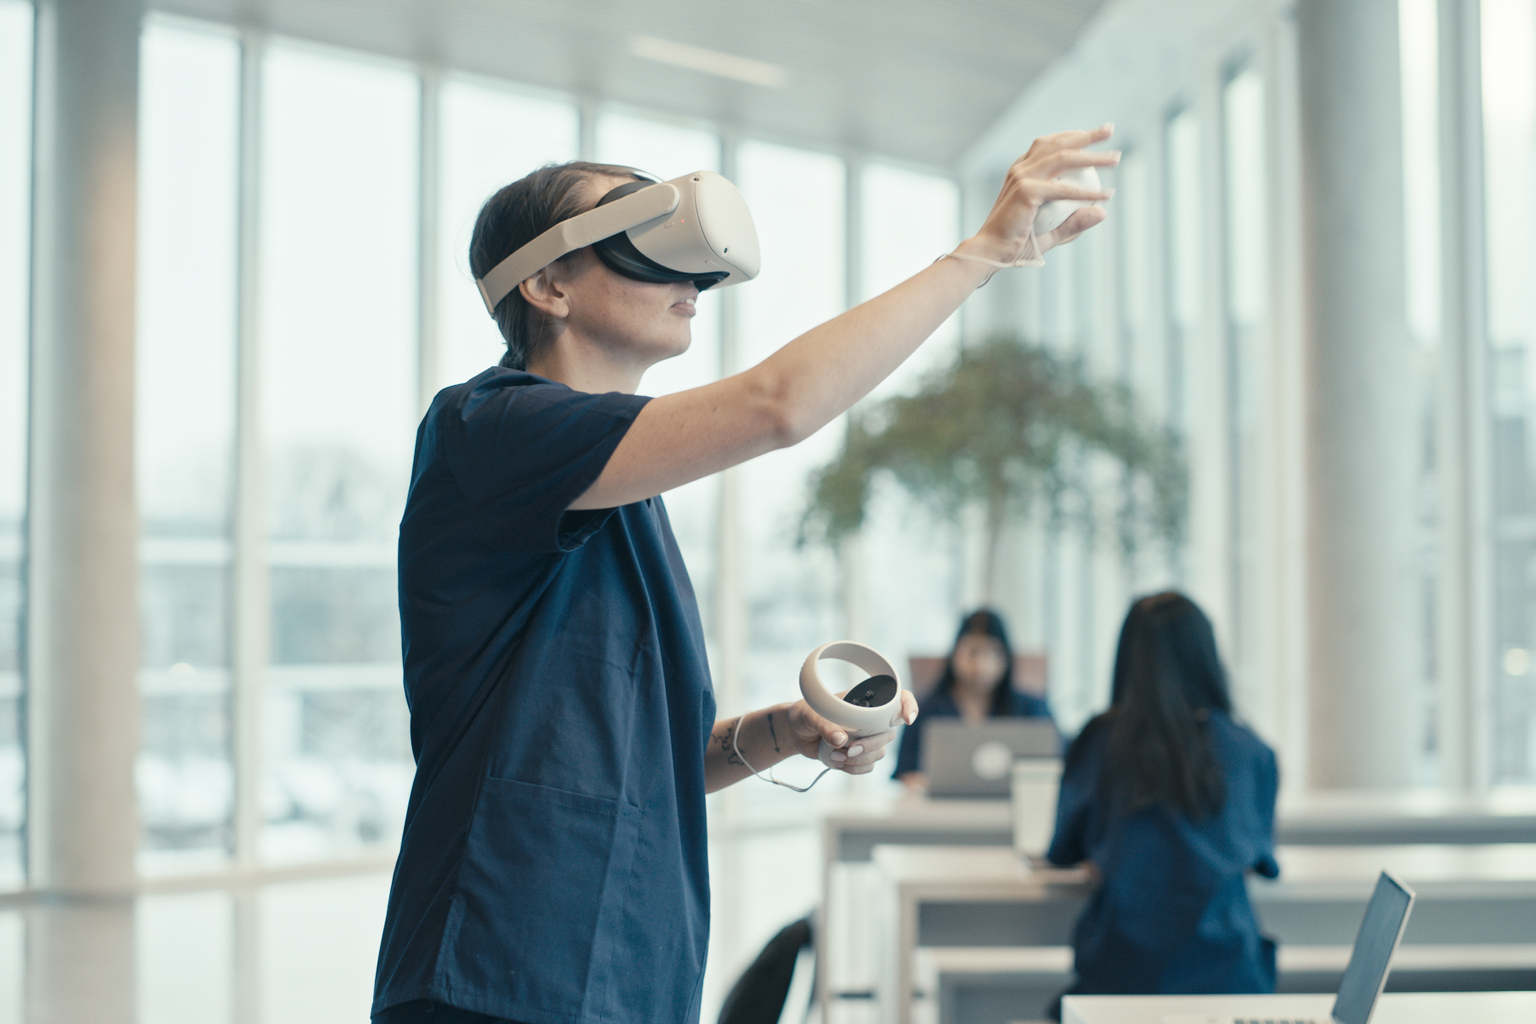 Virtual Reality builds on over a century of nursing simulation innovations